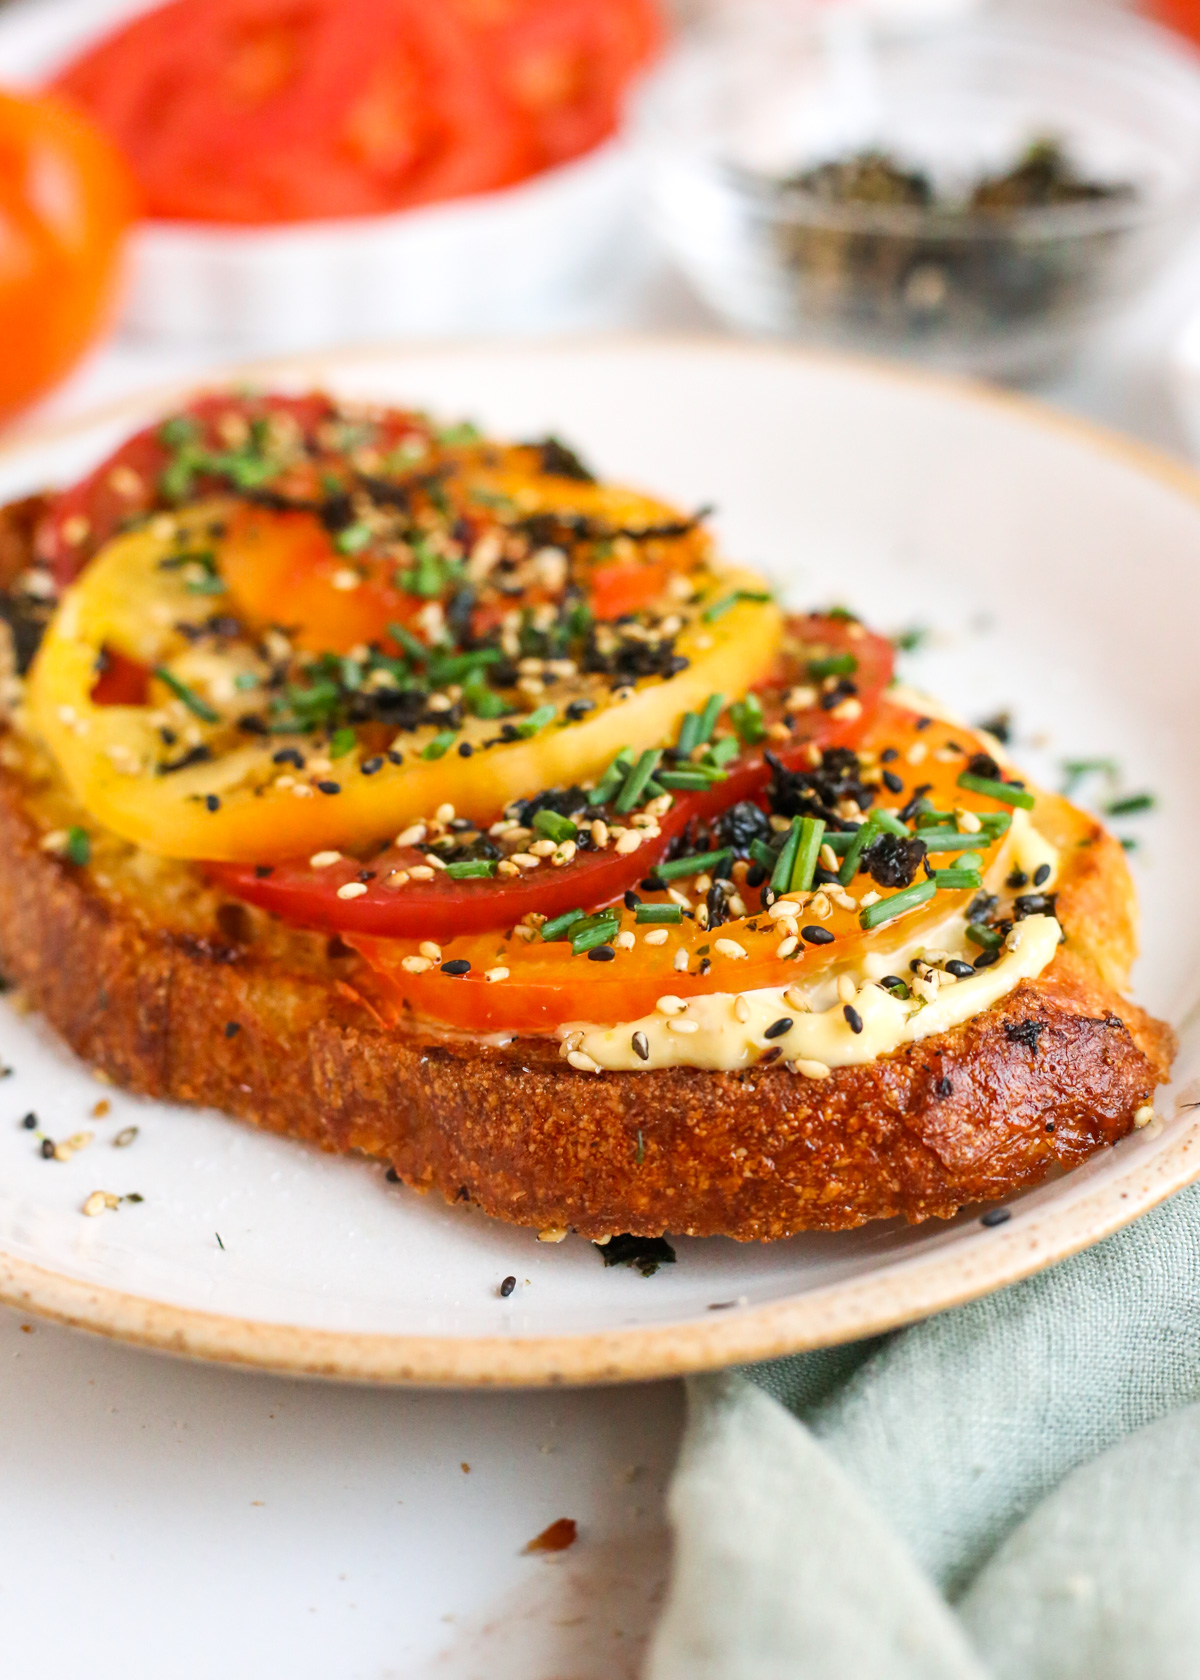 A side view of a slice of Furikake Tomato Toast, showing the layers of golden toasted sourdough bread, thick and creamy garlic mayo, thick slices of heirloom tomatoes, and a rustic garnish of furikake and chopped chives